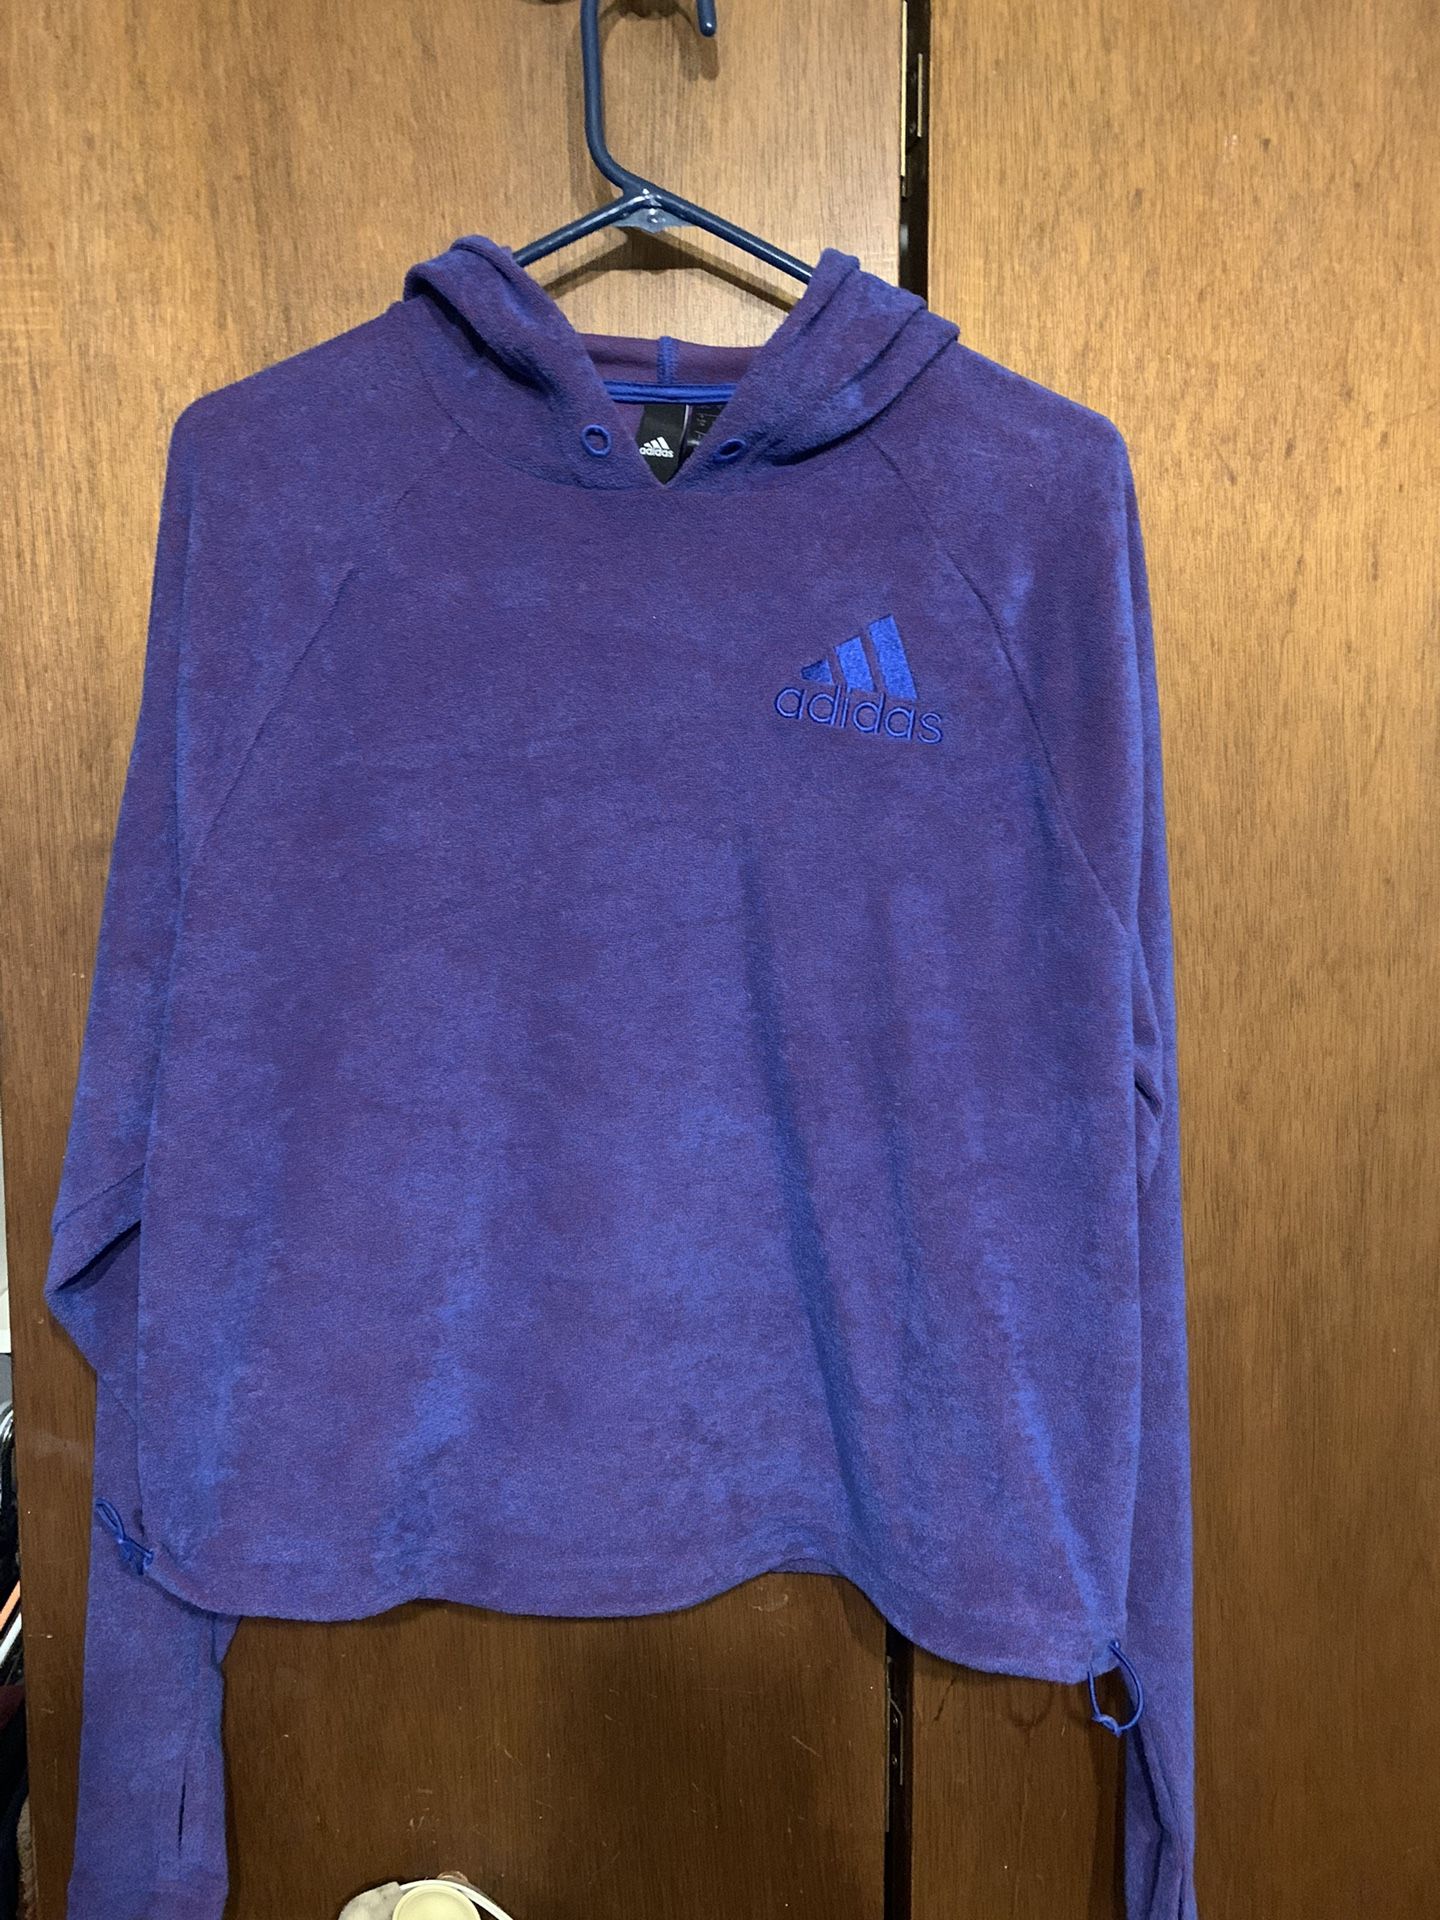 Adidas Hoodie .  Blue But Purple Depending On The Way You Look At It. Size Small. 